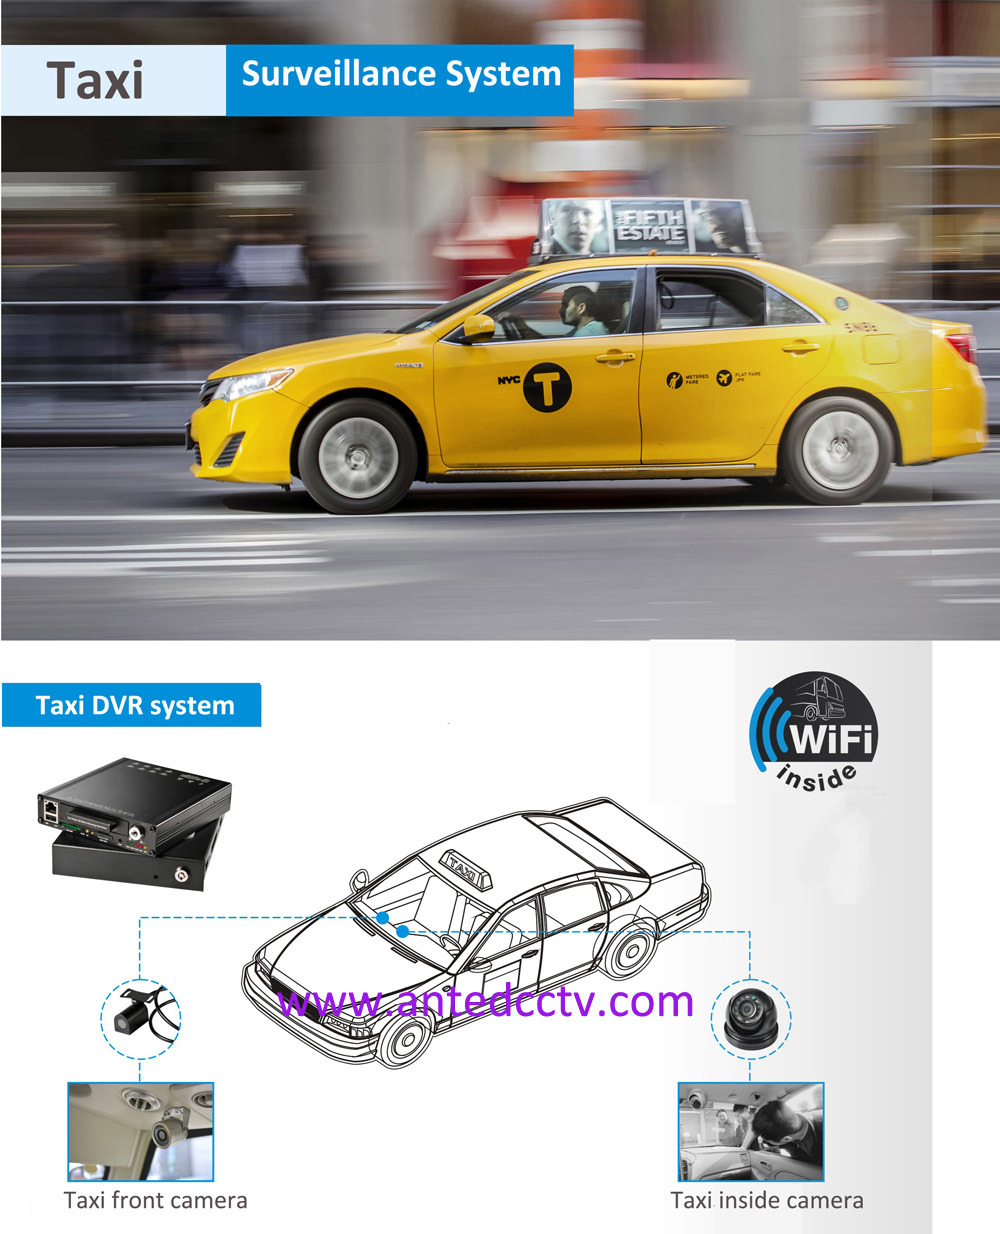 Mobile CCTV Solutions for Bus/Truck/Vehicle/Car/Taxi/Cargo, with GPS/3G/WiFi